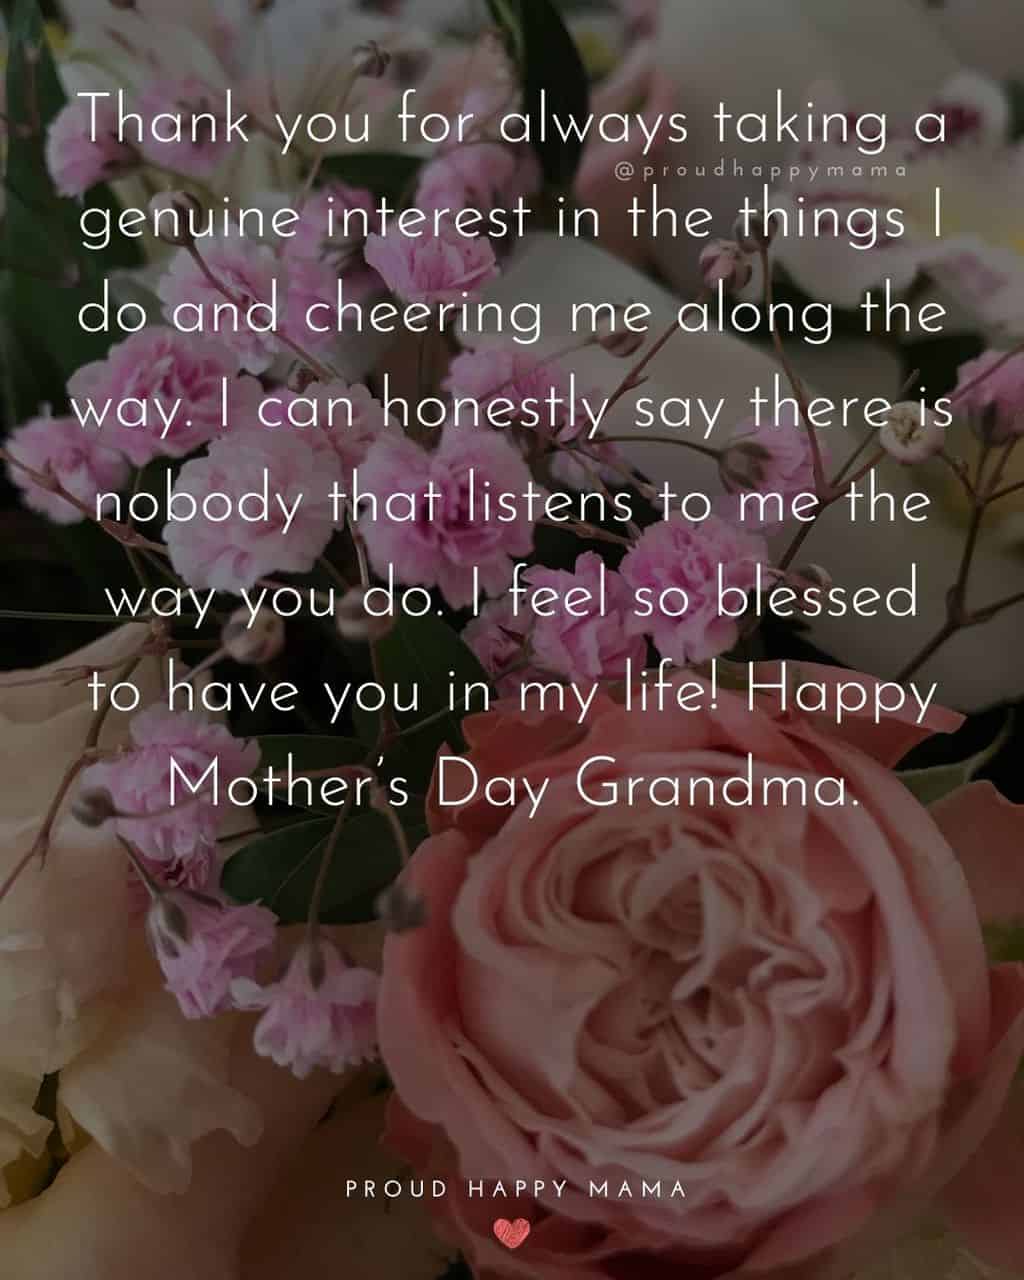 Happy Mothers Day Quotes To Grandma - Thank you for always taking a genuine interest in the things I do and cheering me